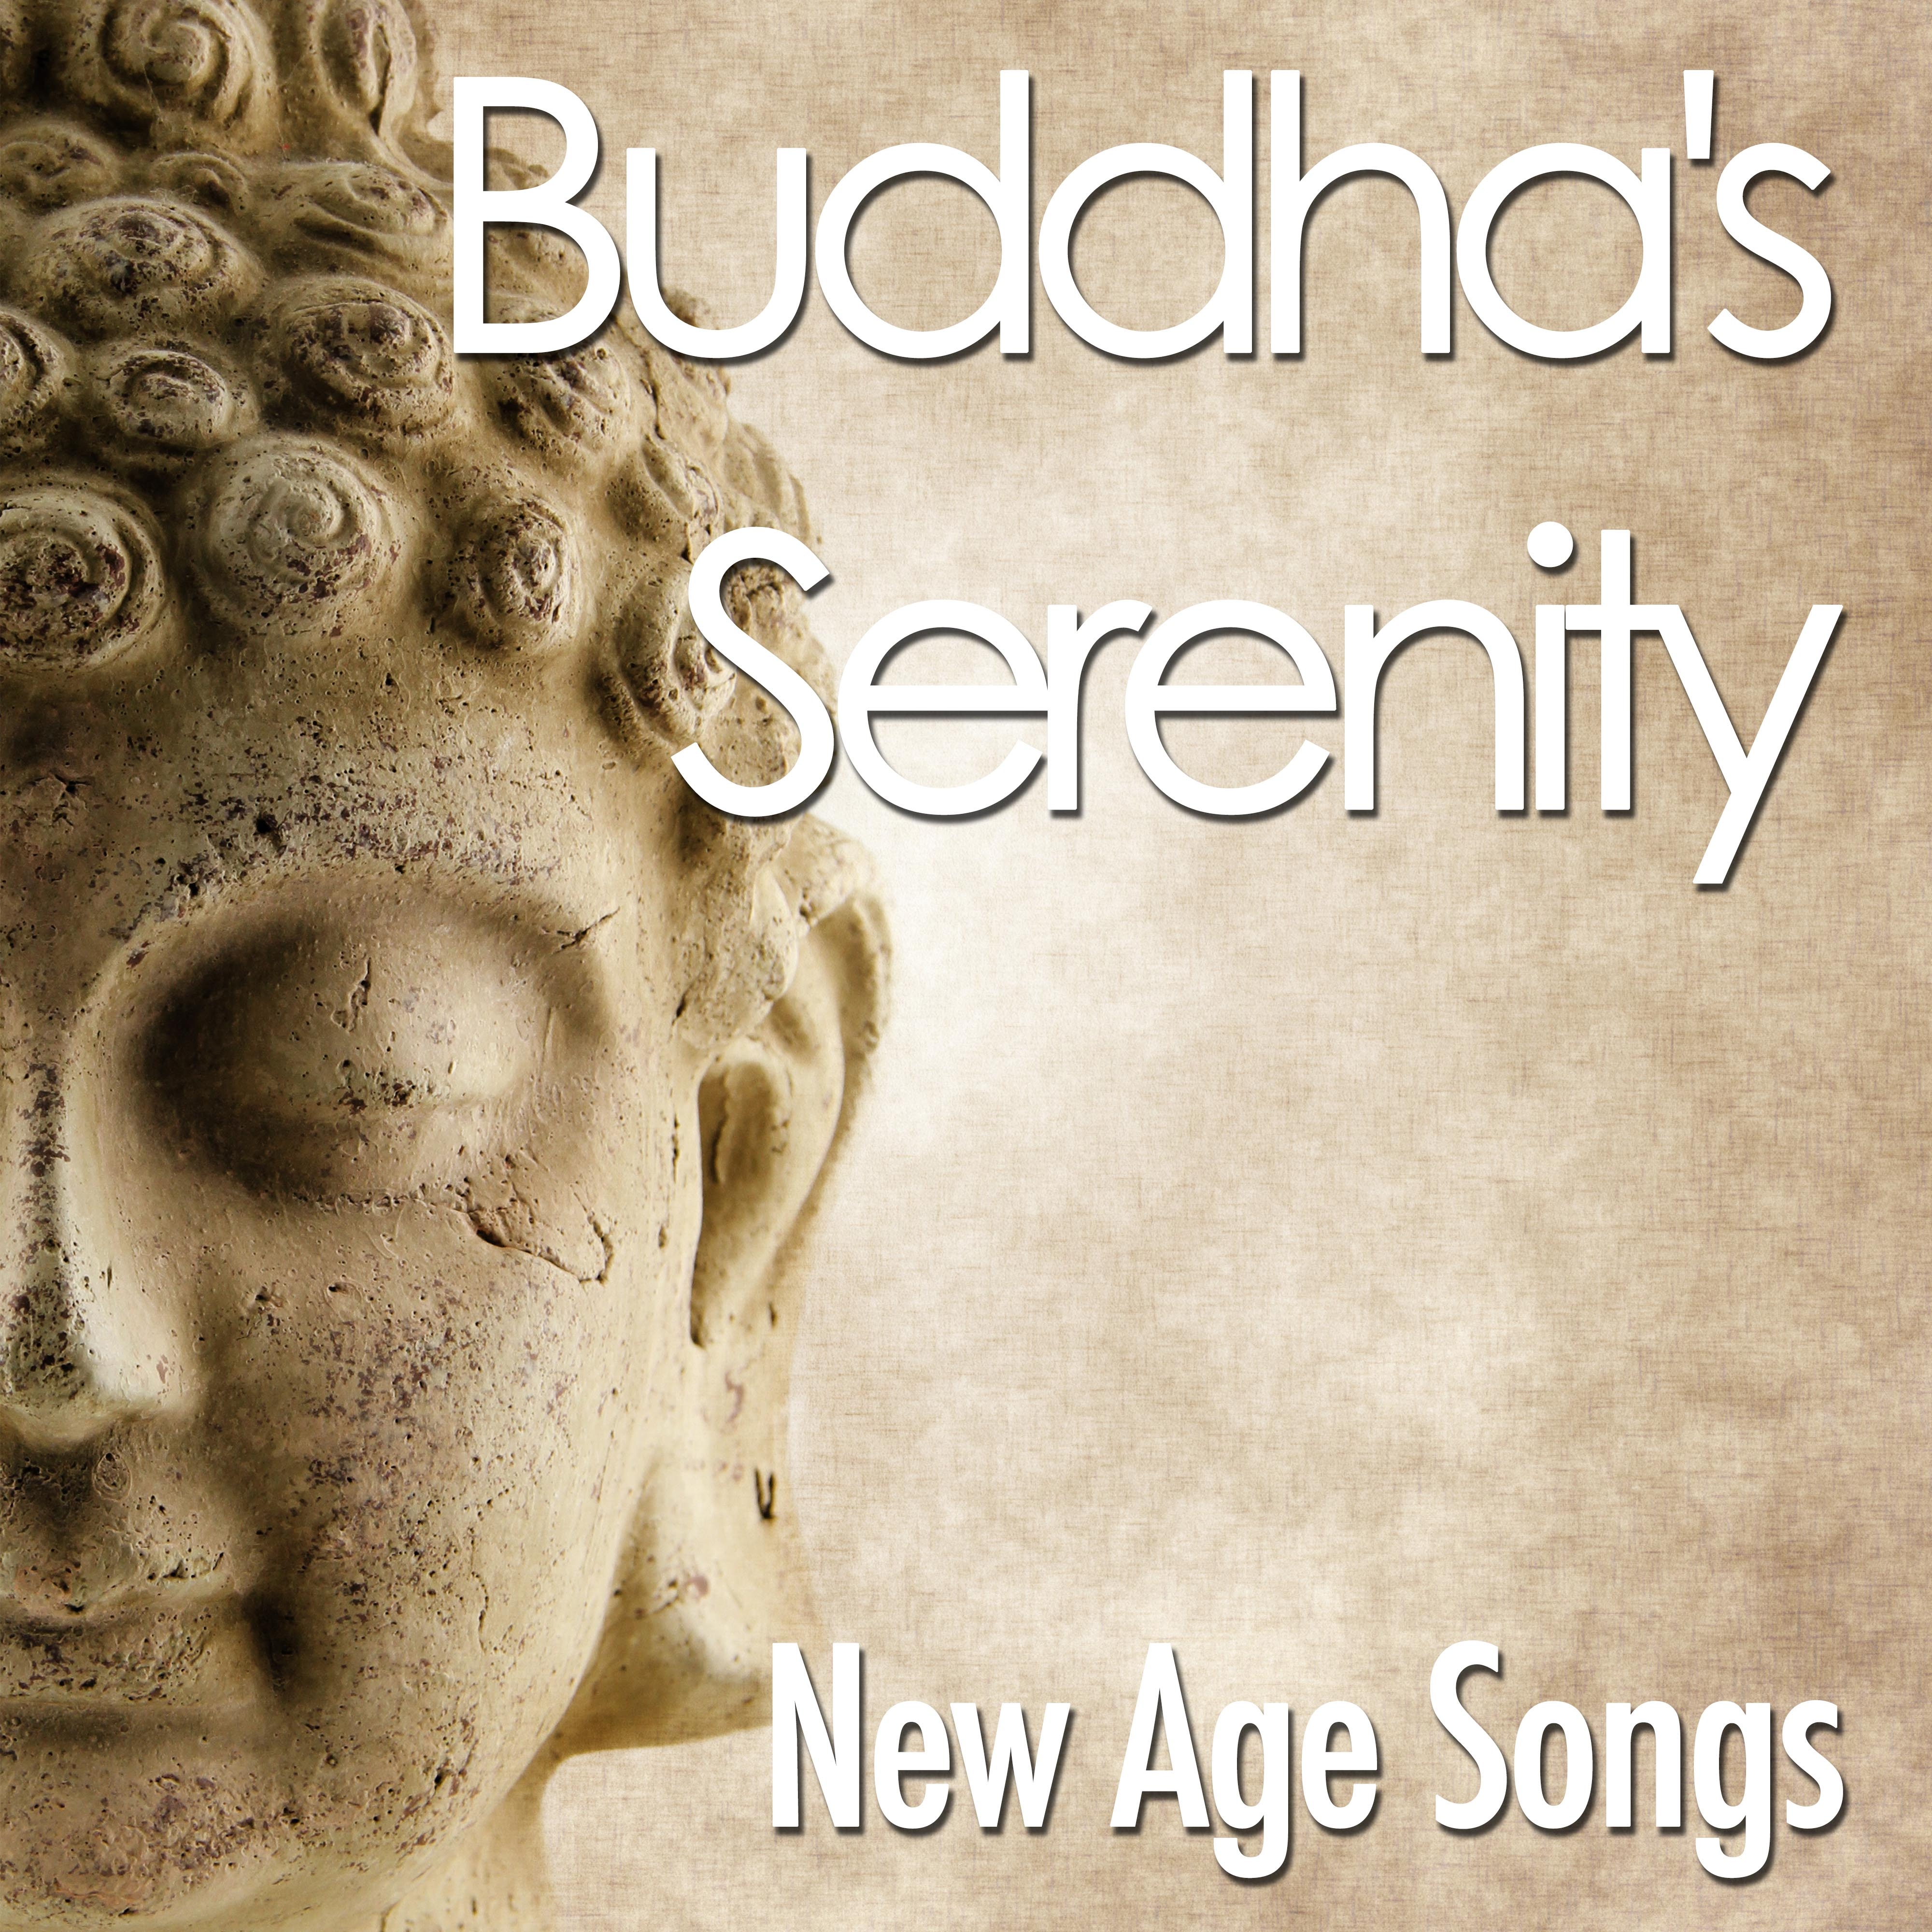 Buddha's Serenity: Experience True Peace by Listening to these New Age Songs for Tranquility